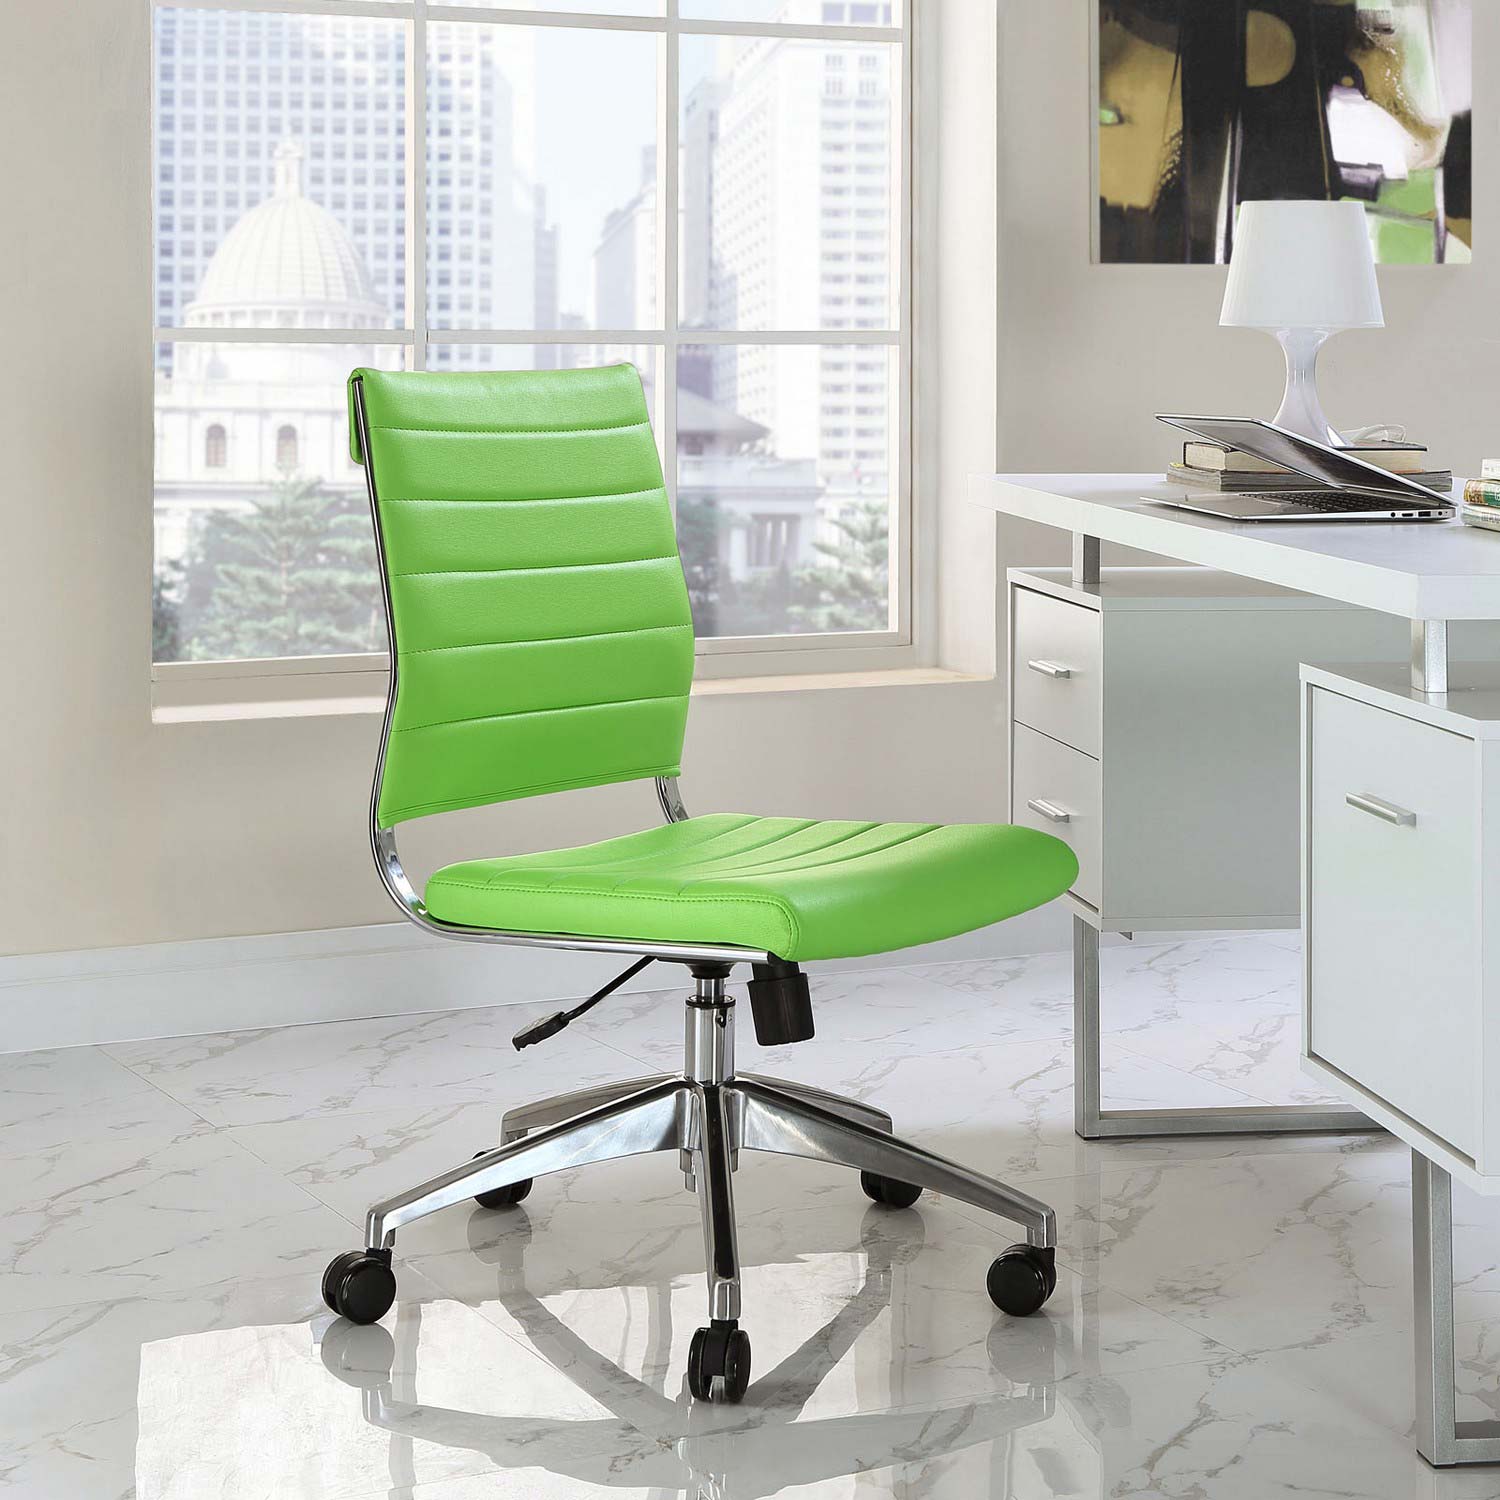 Modway Jive Armless Mid Back Office Chair - Bright Green